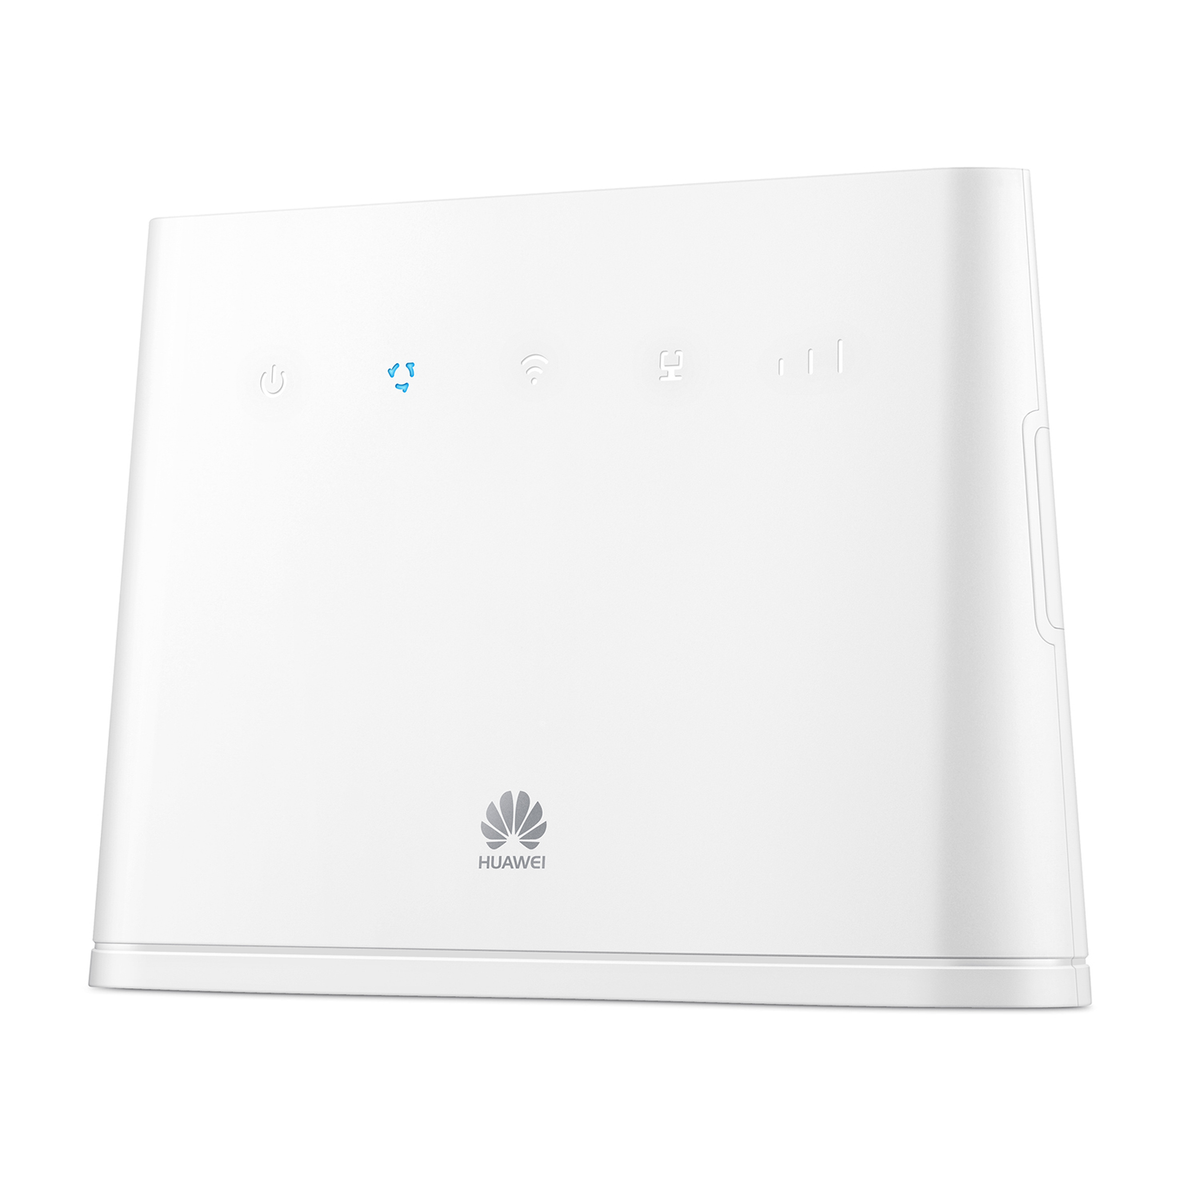 HUAWEI B311S-221 STAT LTE DL Mbit/s 150MBPS ROUTER CAT4 WHITE 4G 150 Router